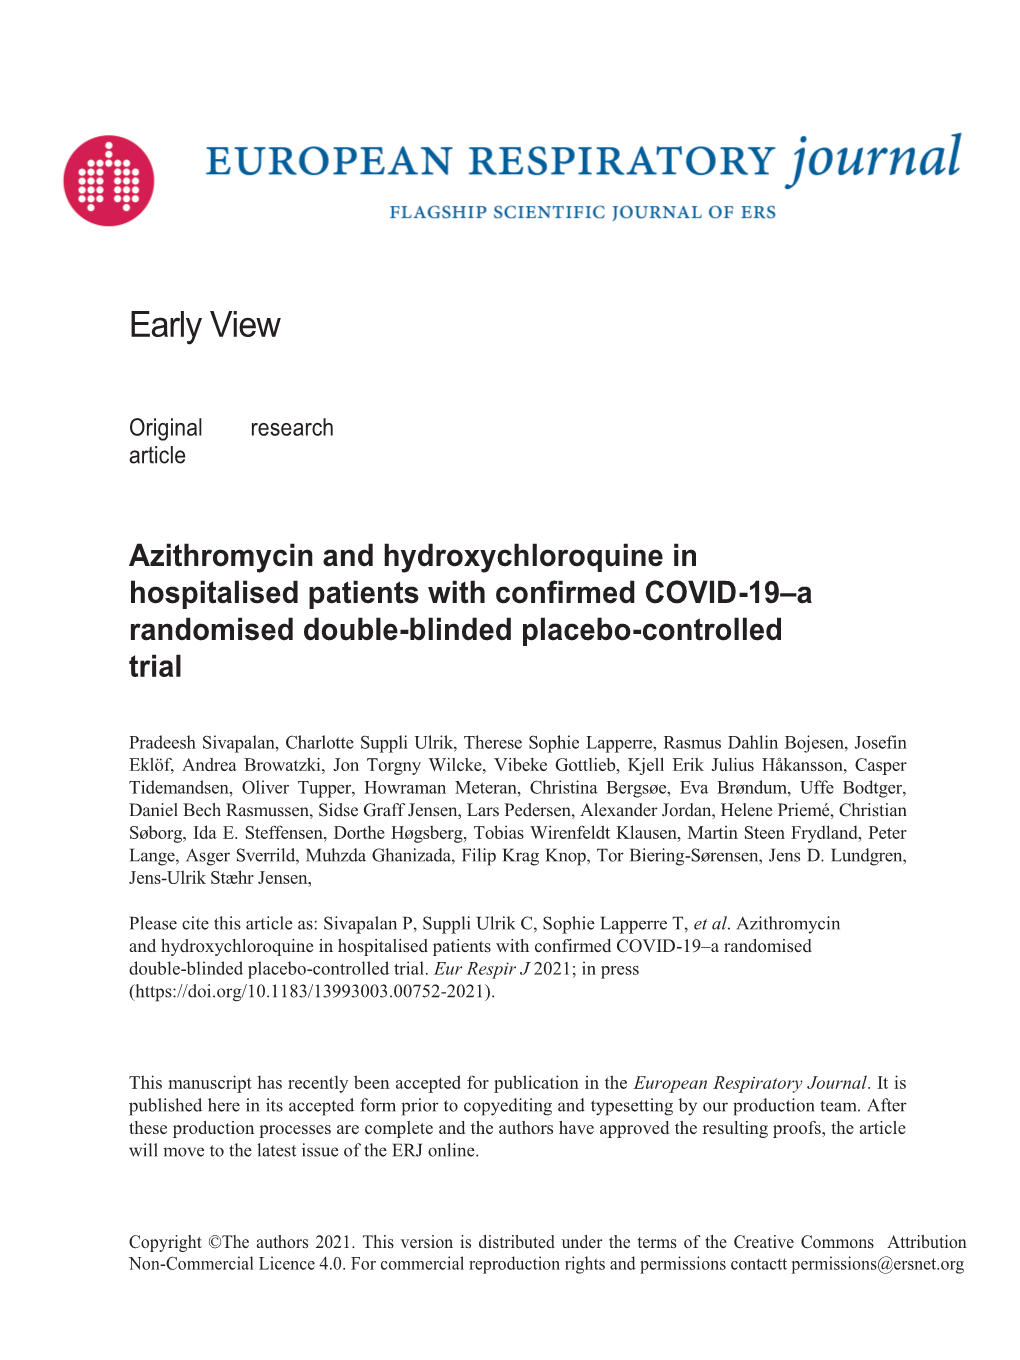 Azithromycin and Hydroxychloroquine in Hospitalised Patients with Confirmed COVID-19–A Randomised Double-Blinded Placebo-Controlled Trial